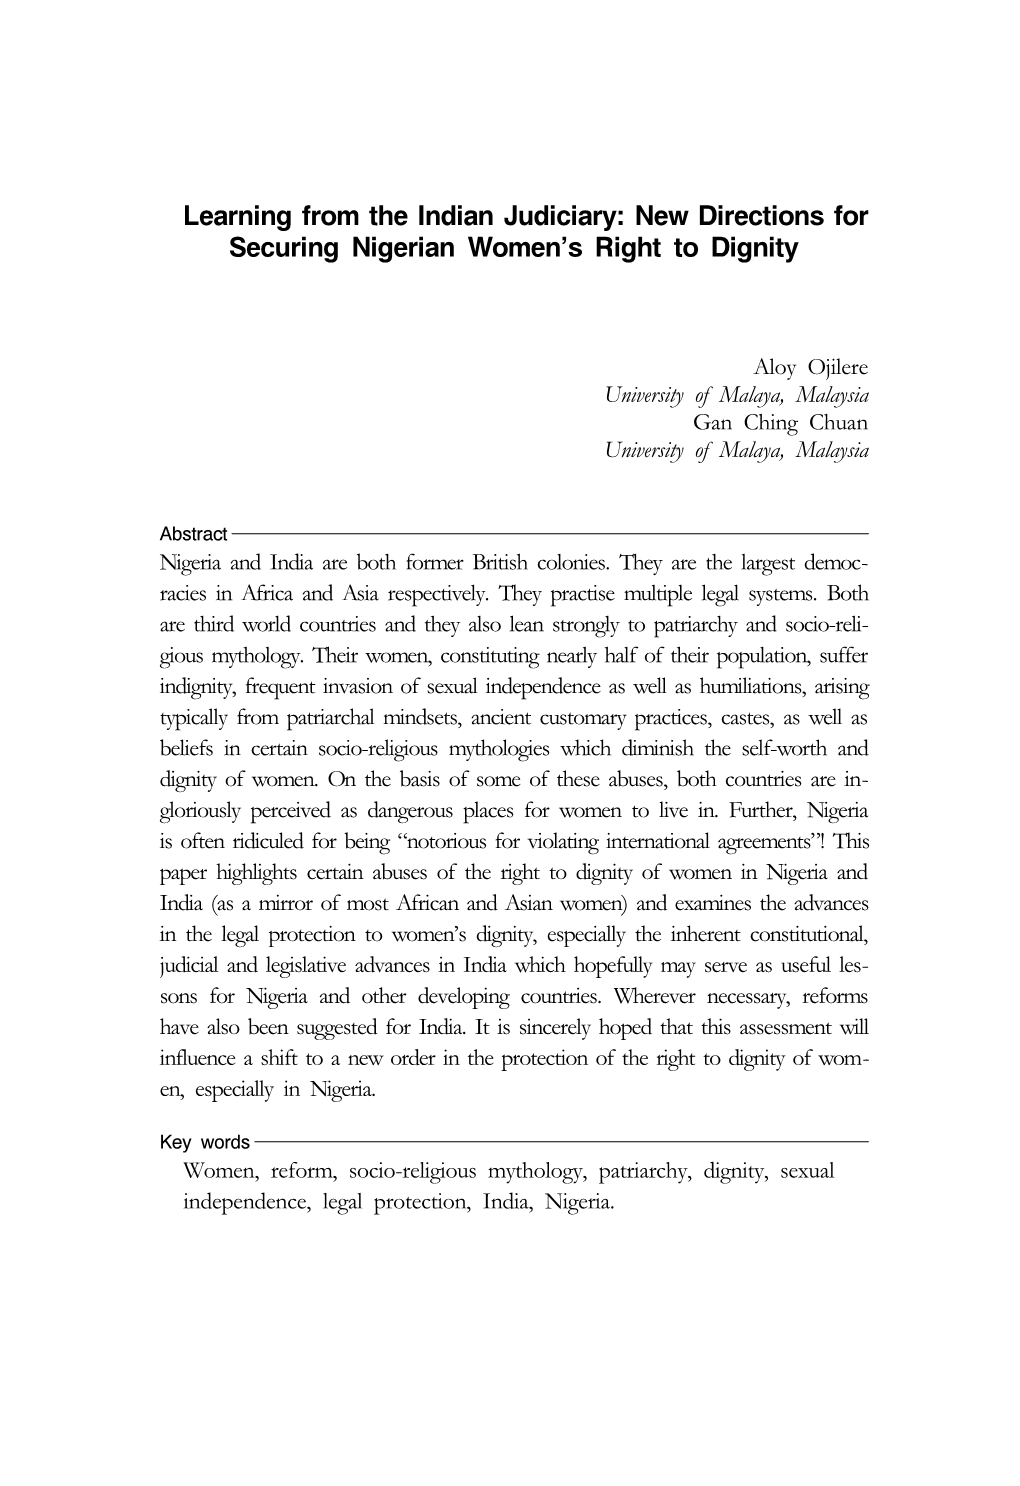 New Directions for Securing Nigerian Women's Right to Dignity